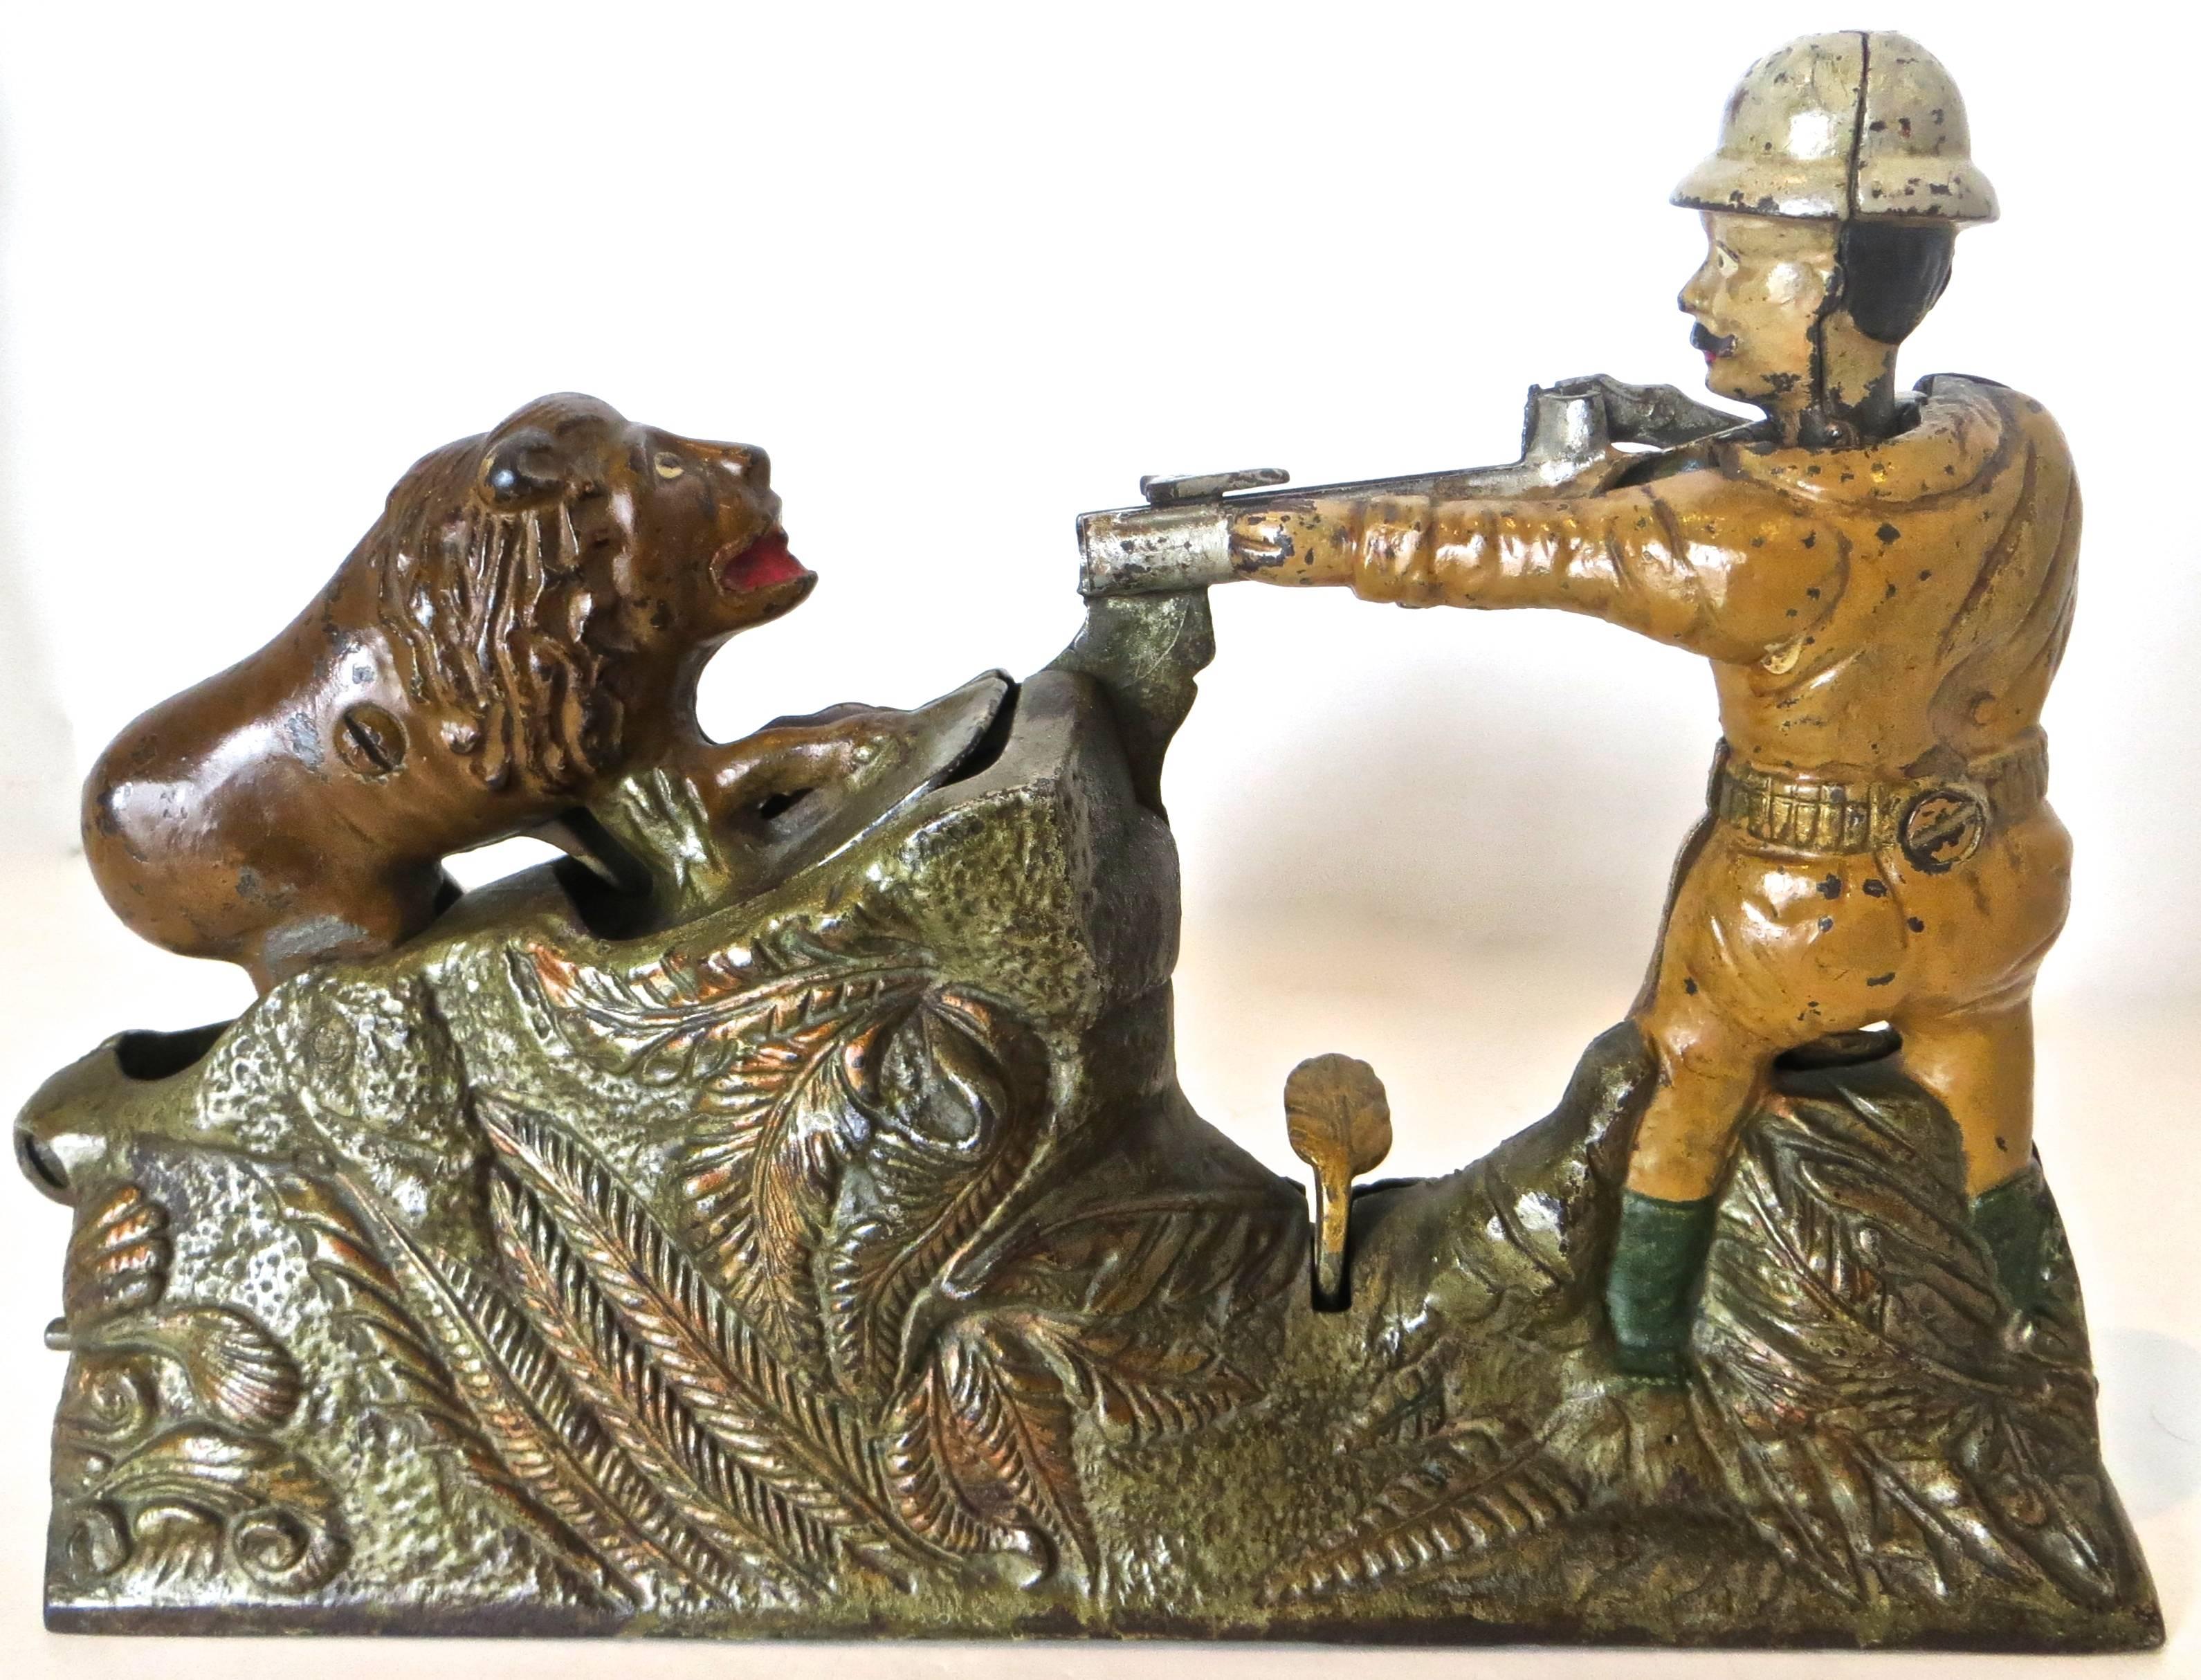 Manufactured in 1911 by the J. & E. Stevens Company in Cromwell, Connecticut, this rare cast iron mechanical bank purportedly depicts President Teddy Roosevelt aiming his rifle at a lion. Roosevelt is well-known for his affinity towards big game